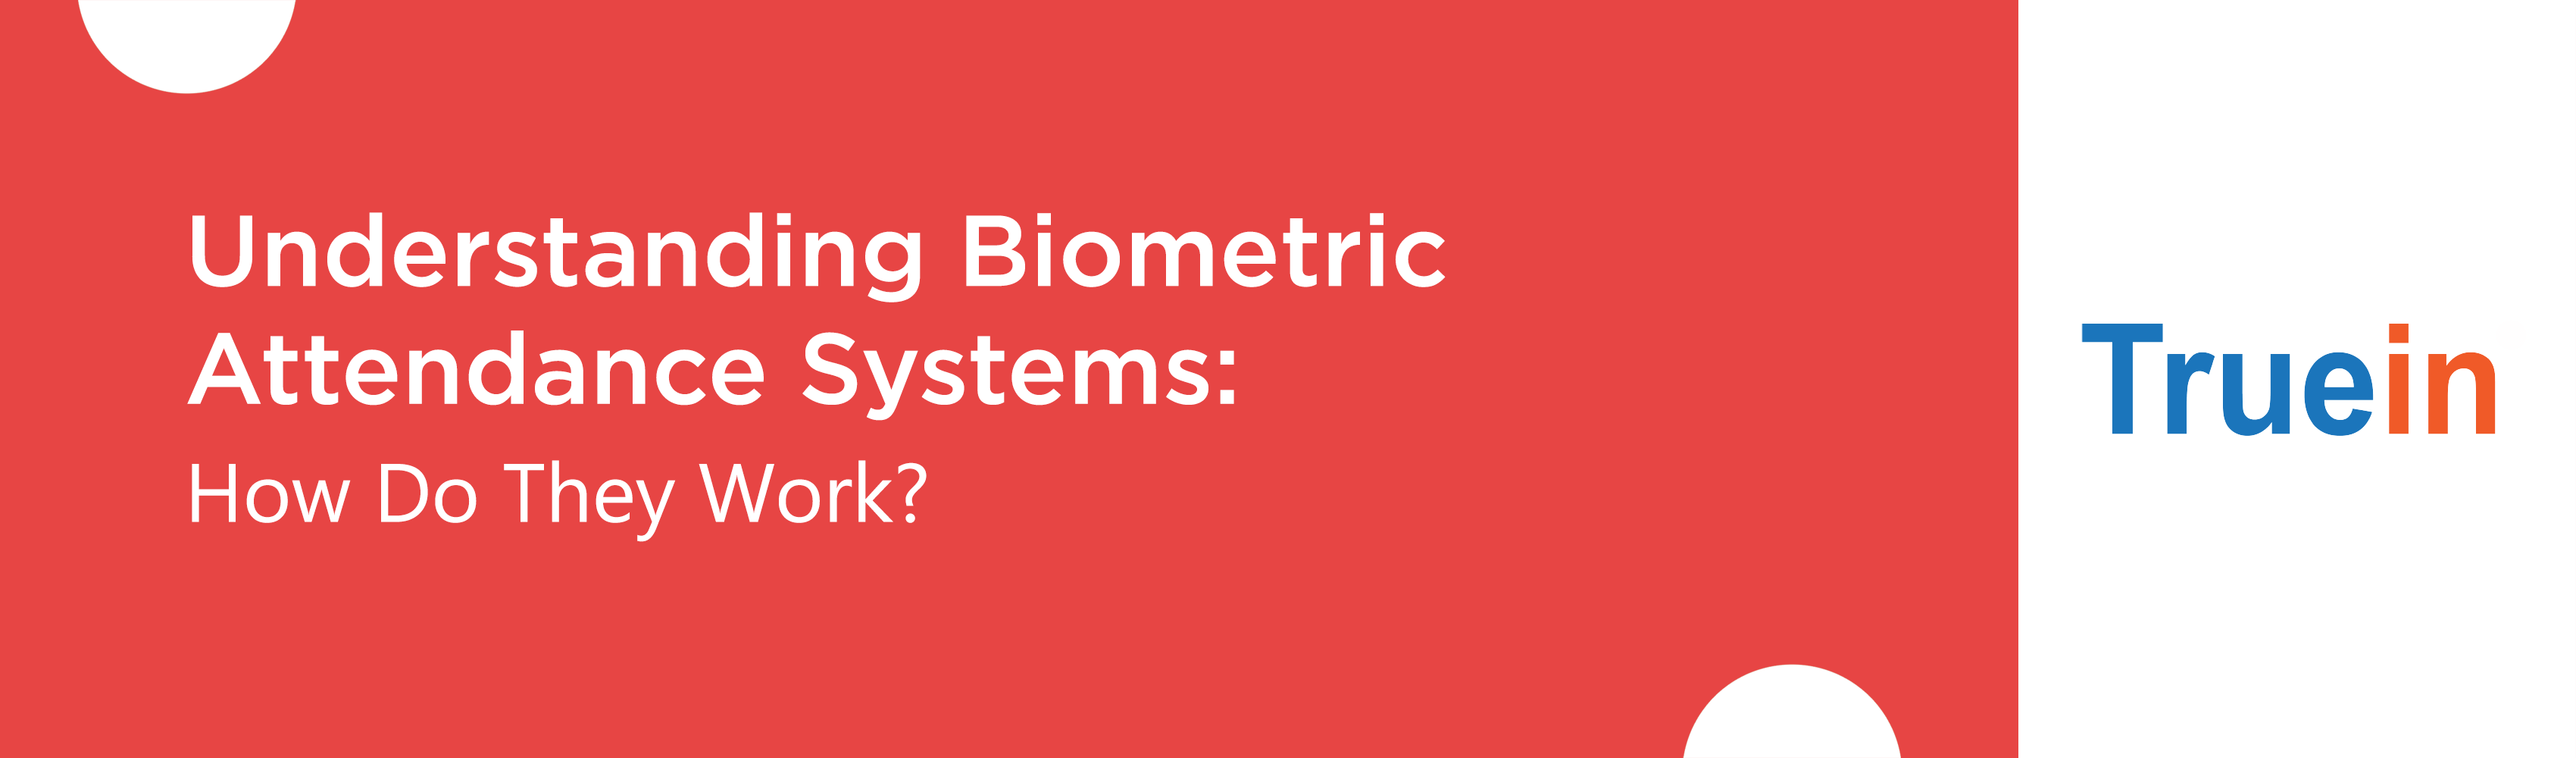 Understanding Biometric Attendance Systems: How Do They Work?